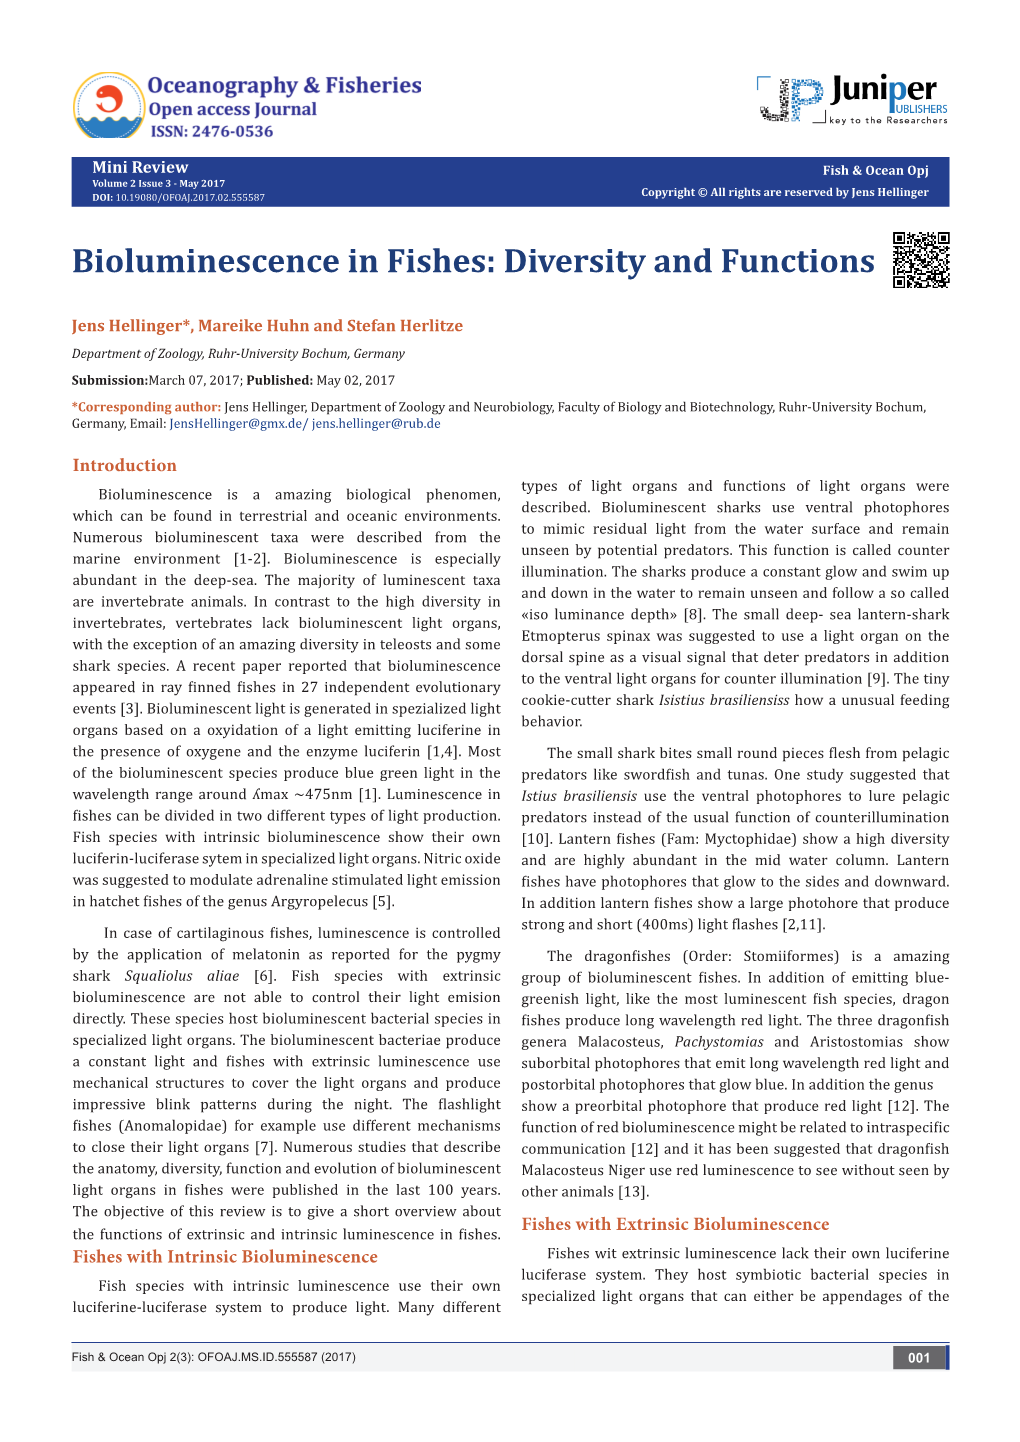 Bioluminescence in Fishes: Diversity and Functions